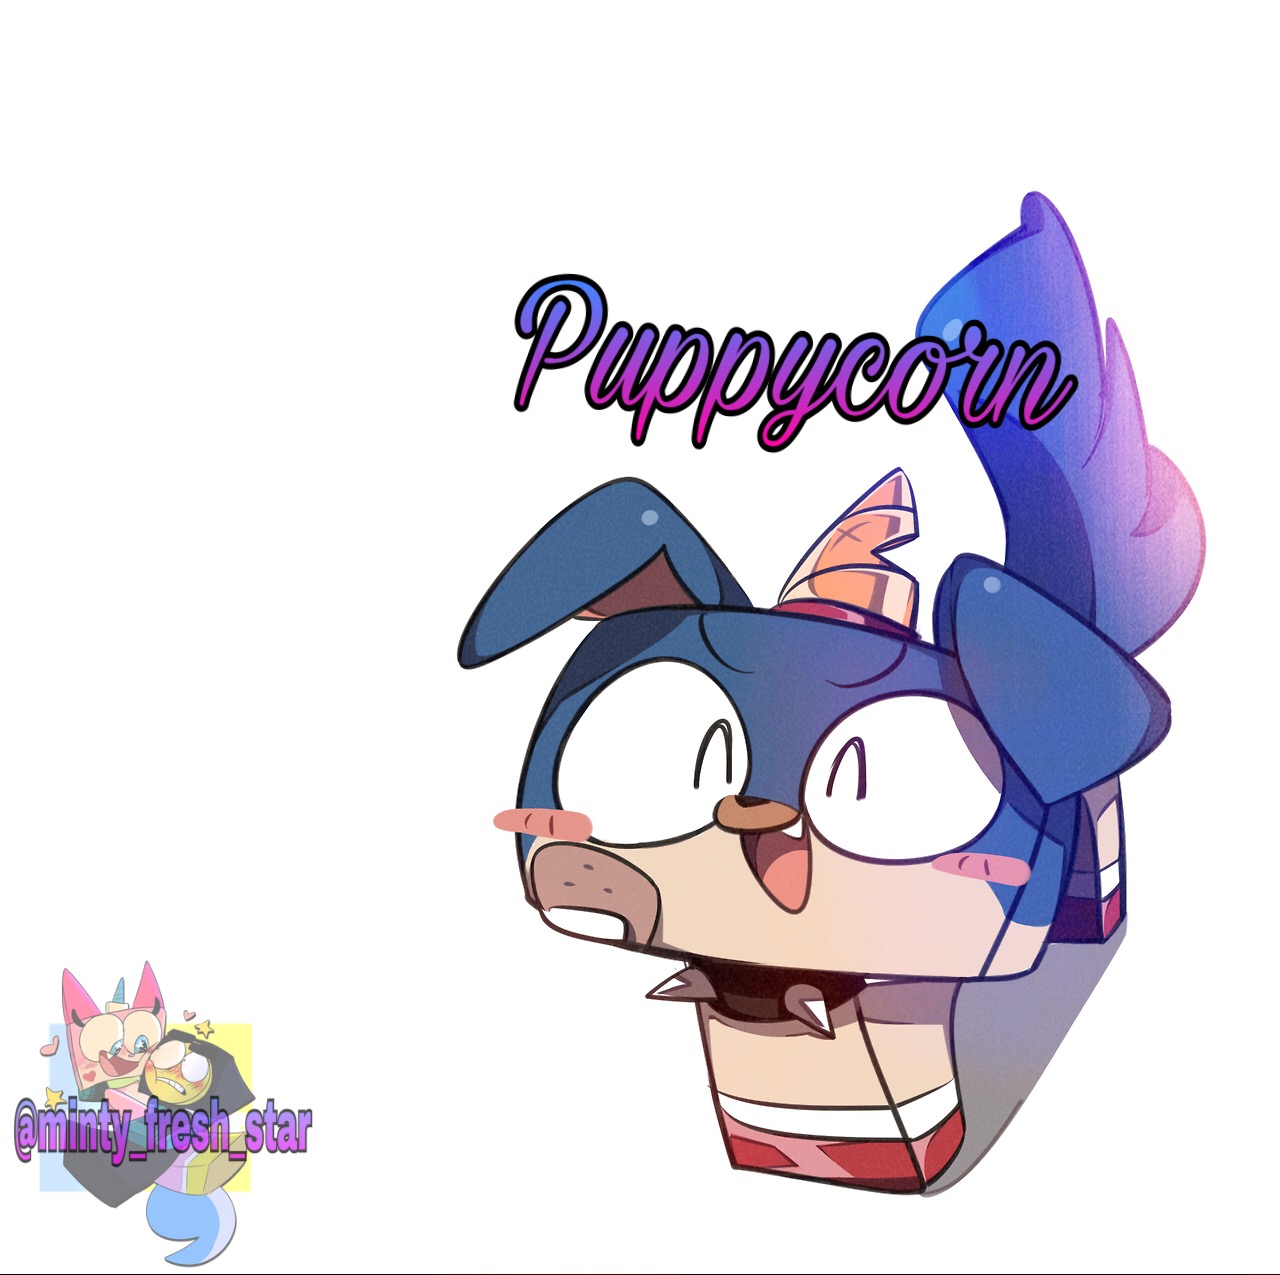 puppycorn unikitty - Image by Spp0ky loves!